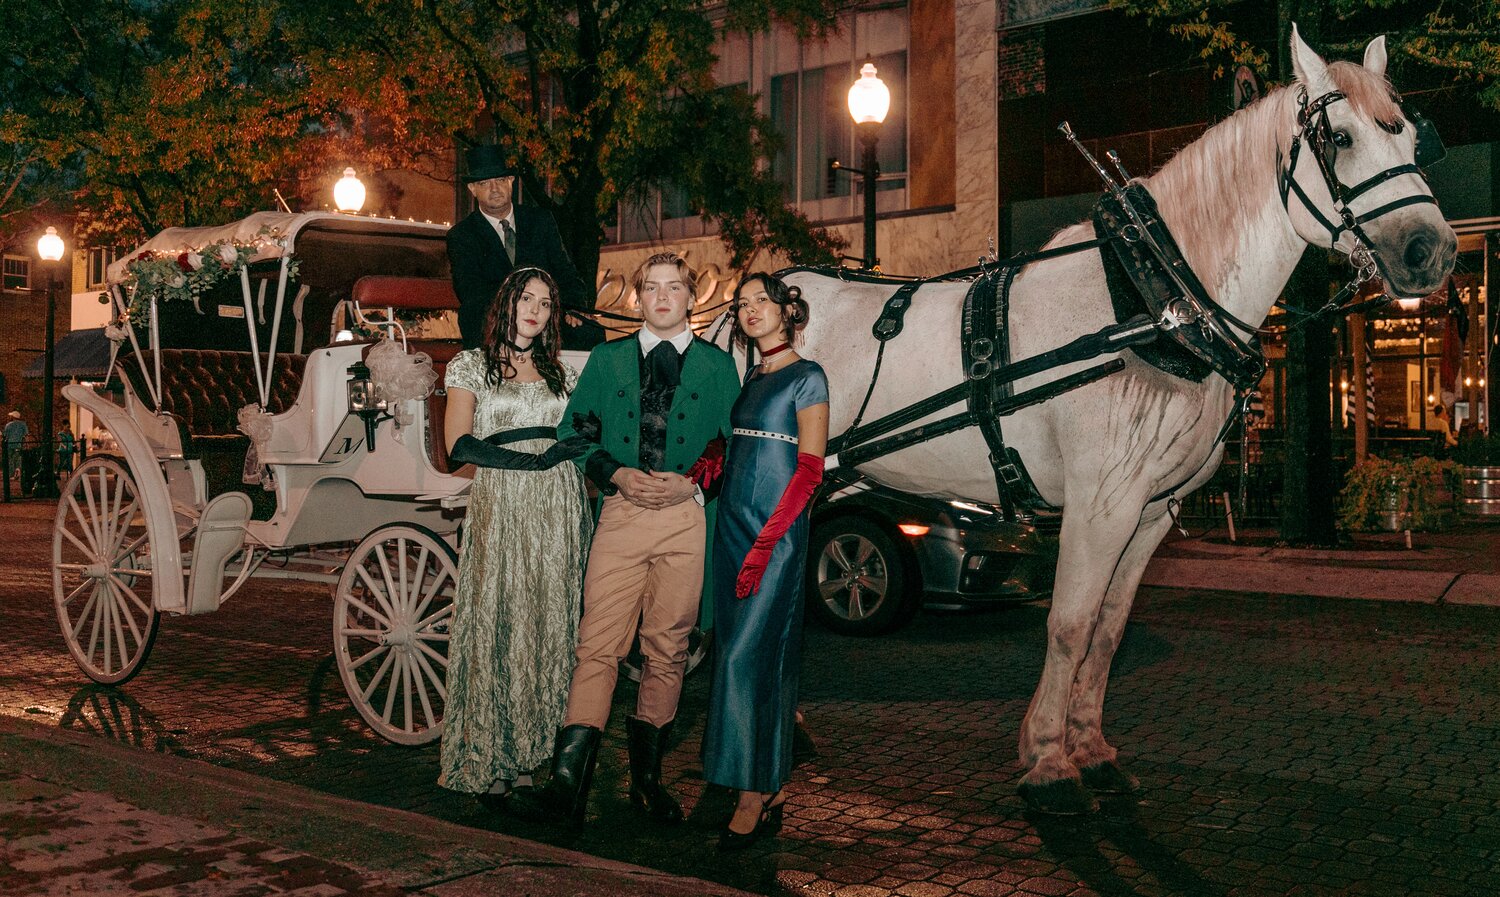 Tara Rochelle Cathey, Mark Peters and Ally Merino arrive by horse and carriage for Lafayette's Grand Birthday Ball on Saturday in downtown Fayetteville.